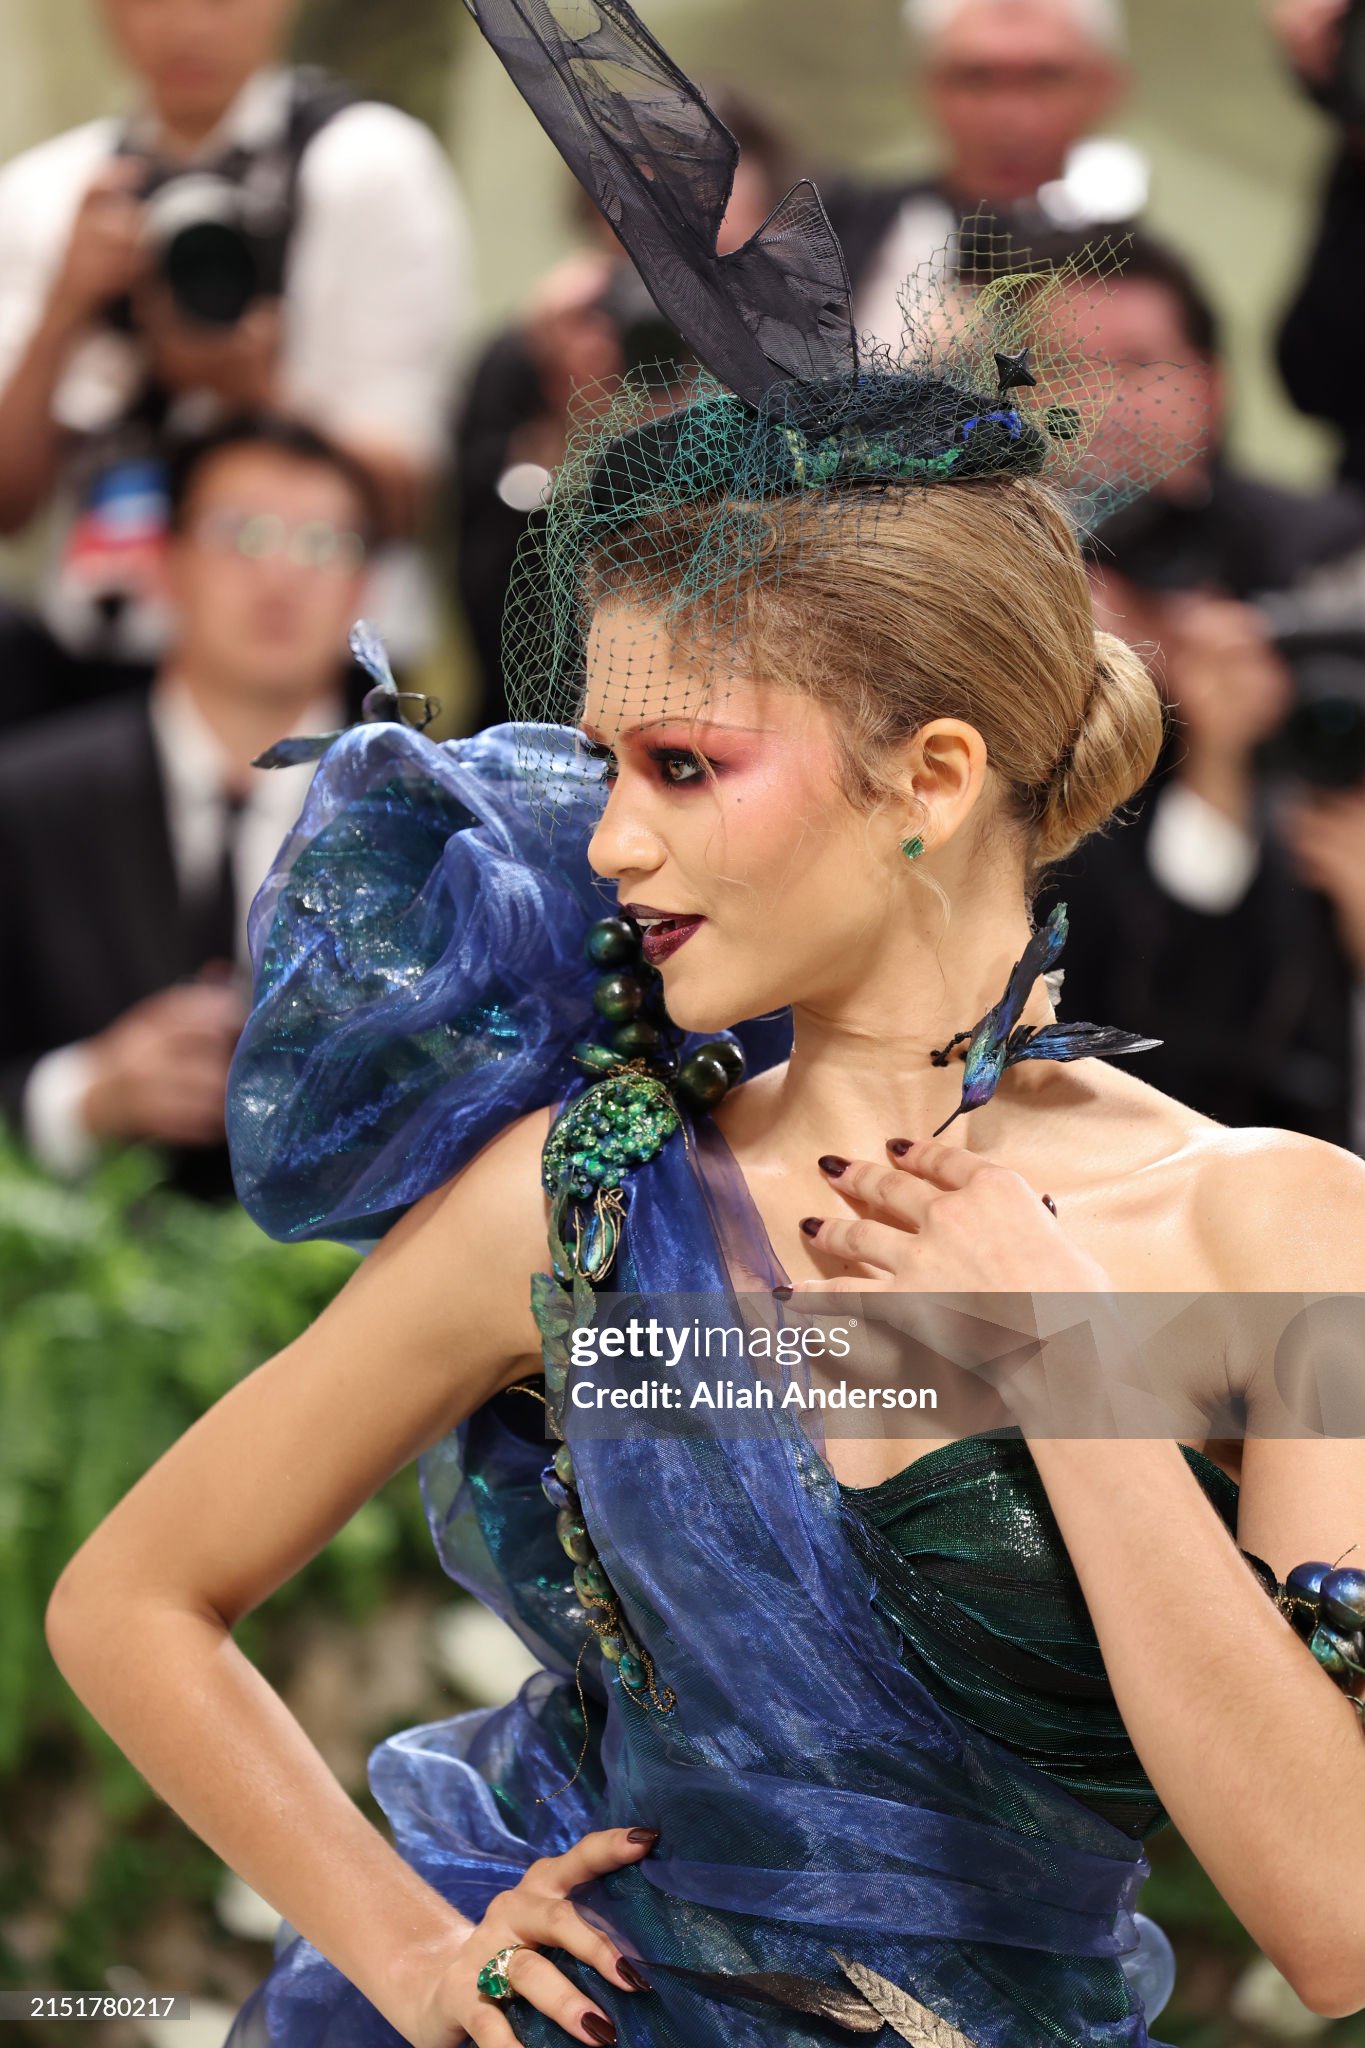 gettyimages-2151780217-2048x2048.jpg